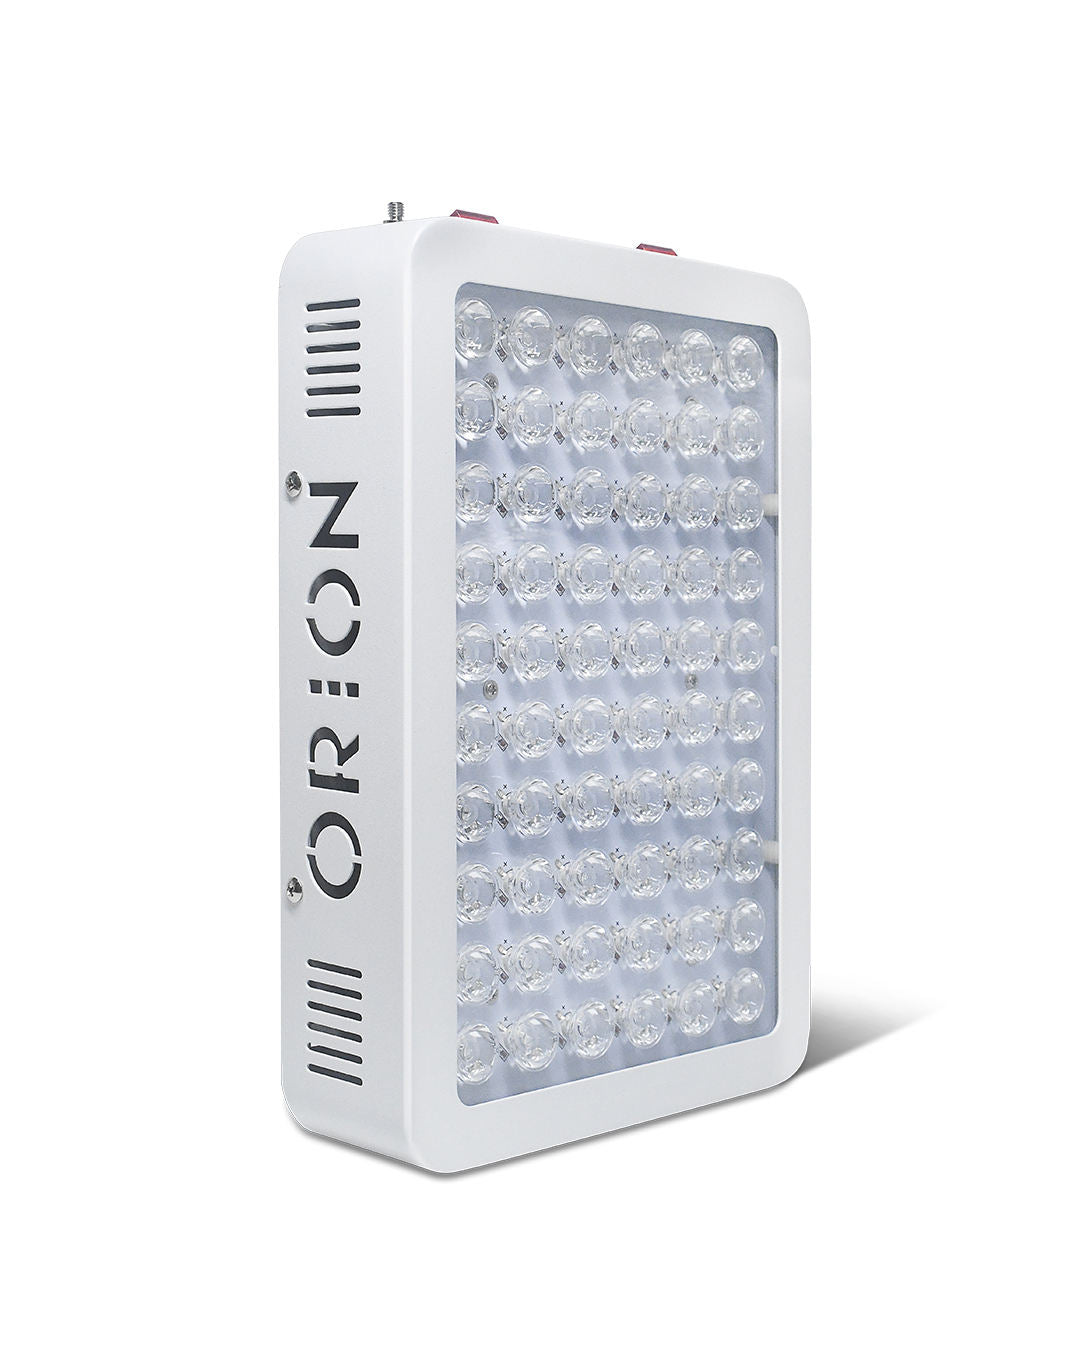 Orion 300. Orion Red Light Therapy. LED Light Therapy. Improves Collagen Production. Mitochondria. Muscle Recovery and Performance.